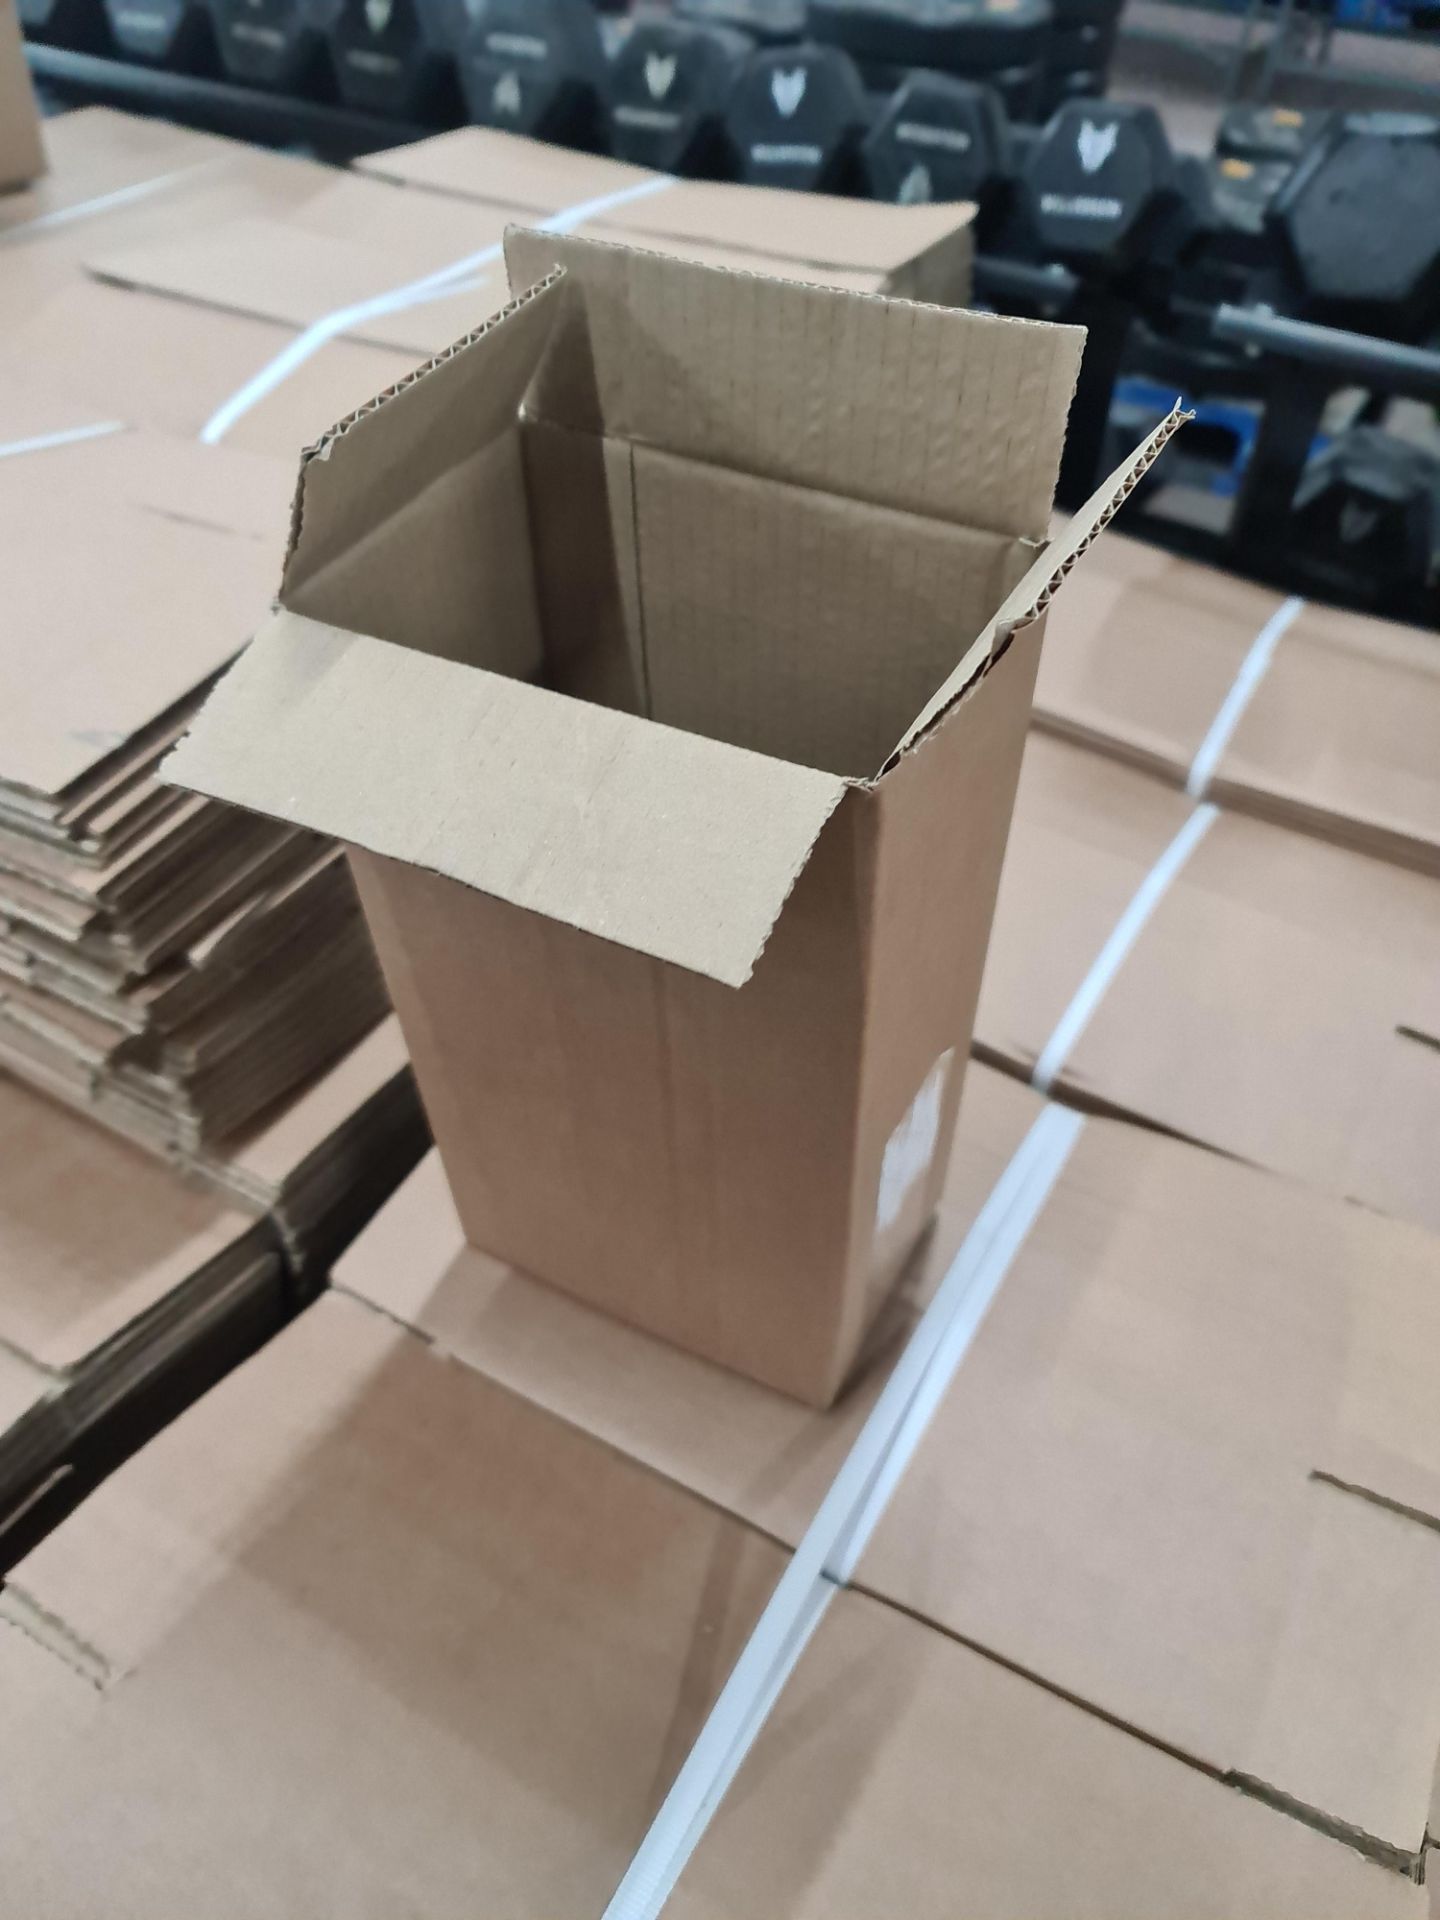 The contents of a pallet of cardboard boxes comprising approximately 975 boxes; 155 mm x 102 mm x 29